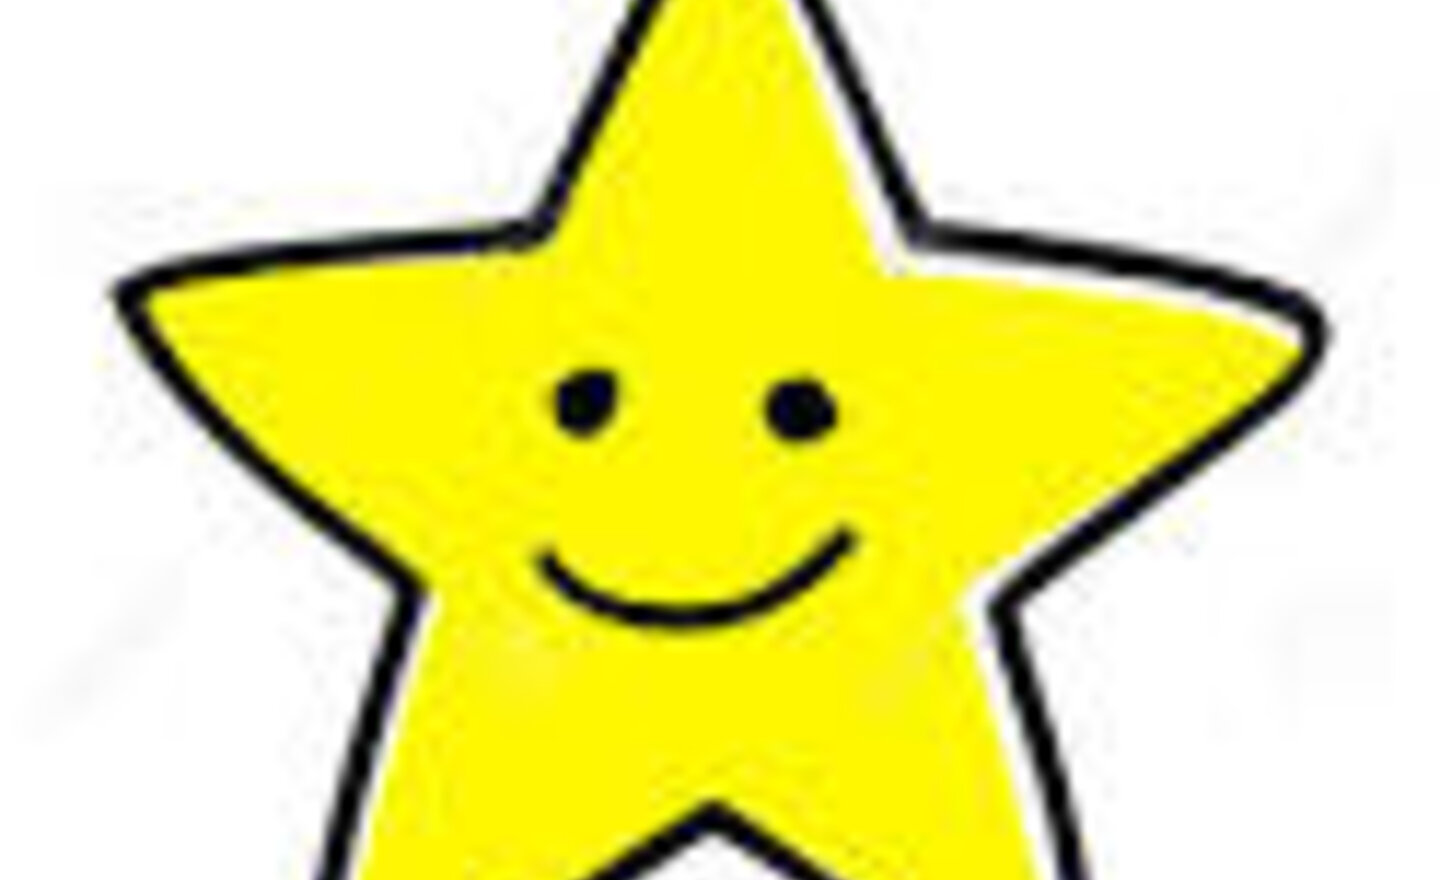 Image of Monday's assembly - The story telling star